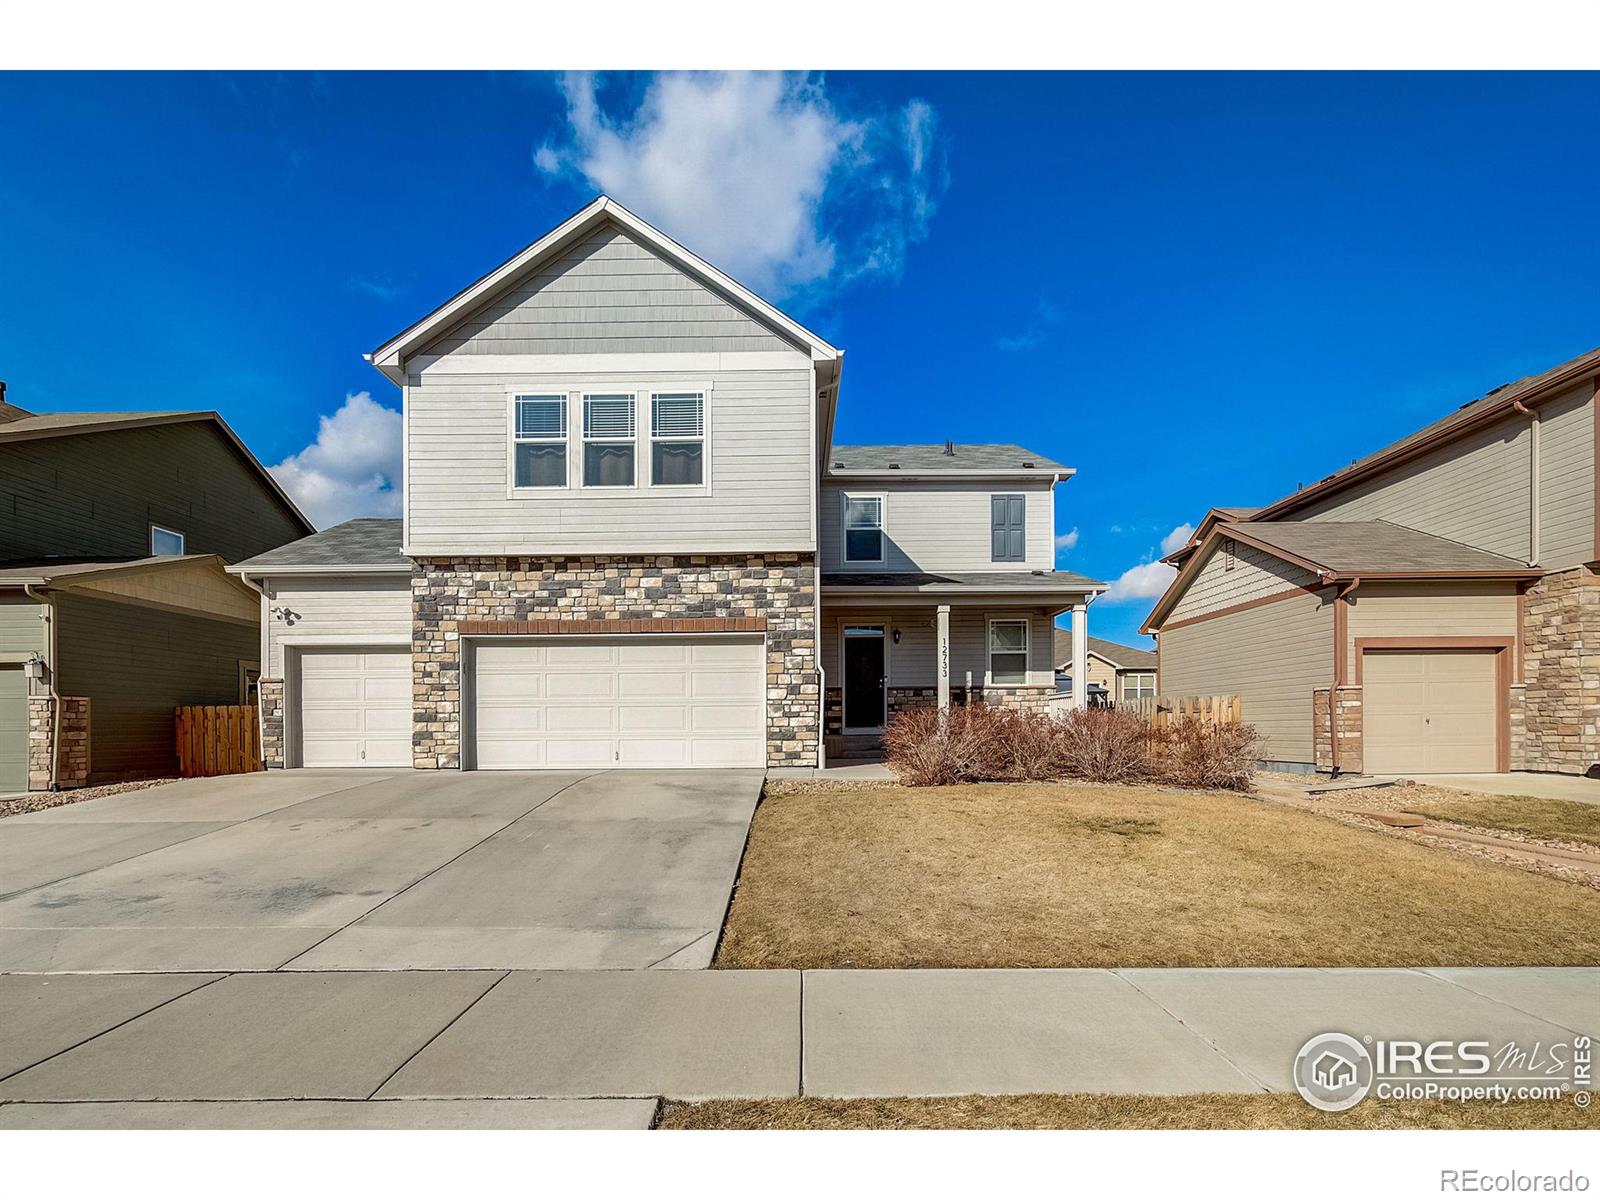 12733 E 104th Drive, commerce city MLS: 4567891003235 Beds: 3 Baths: 3 Price: $550,000